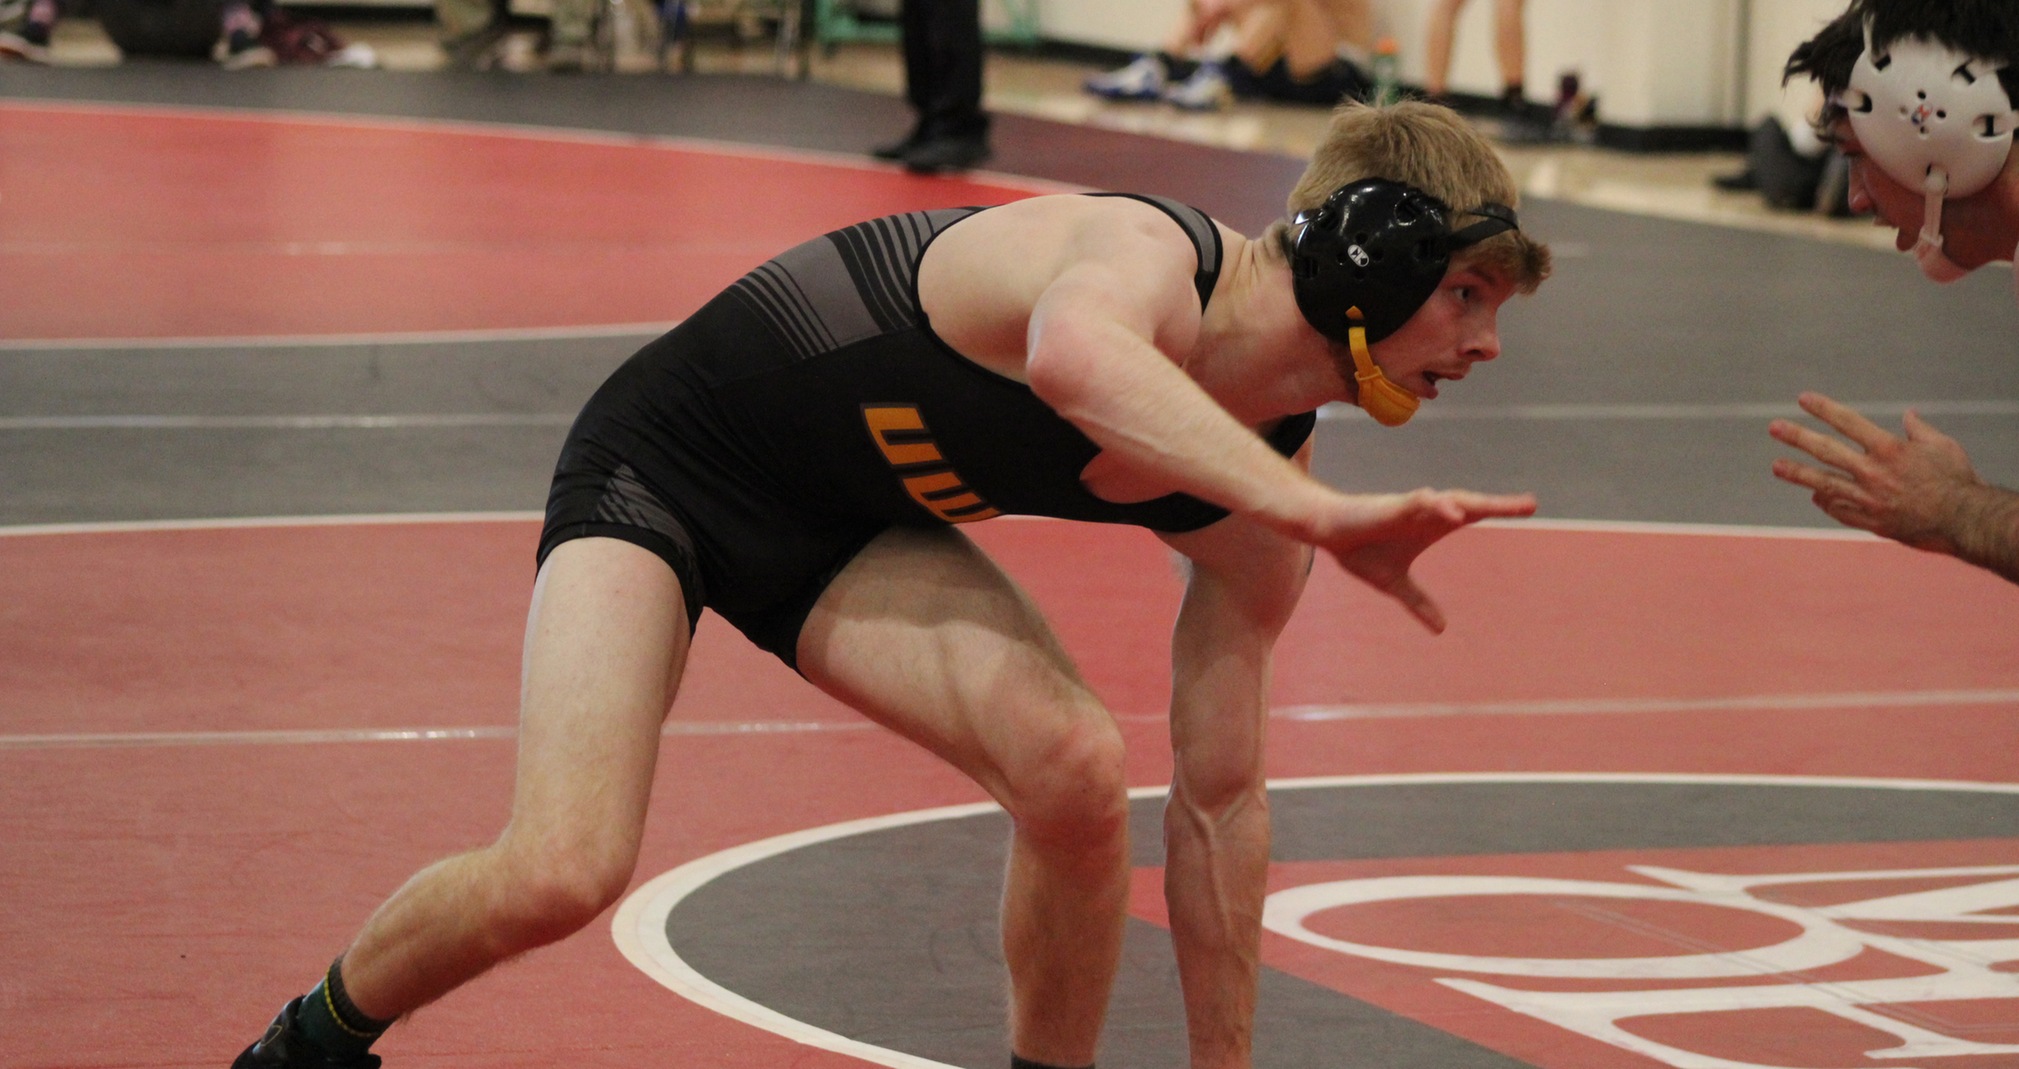 Keagan Lazar won the 149-pound title at the Milwaukee School of Engineering Invitational with a 3-0 record.